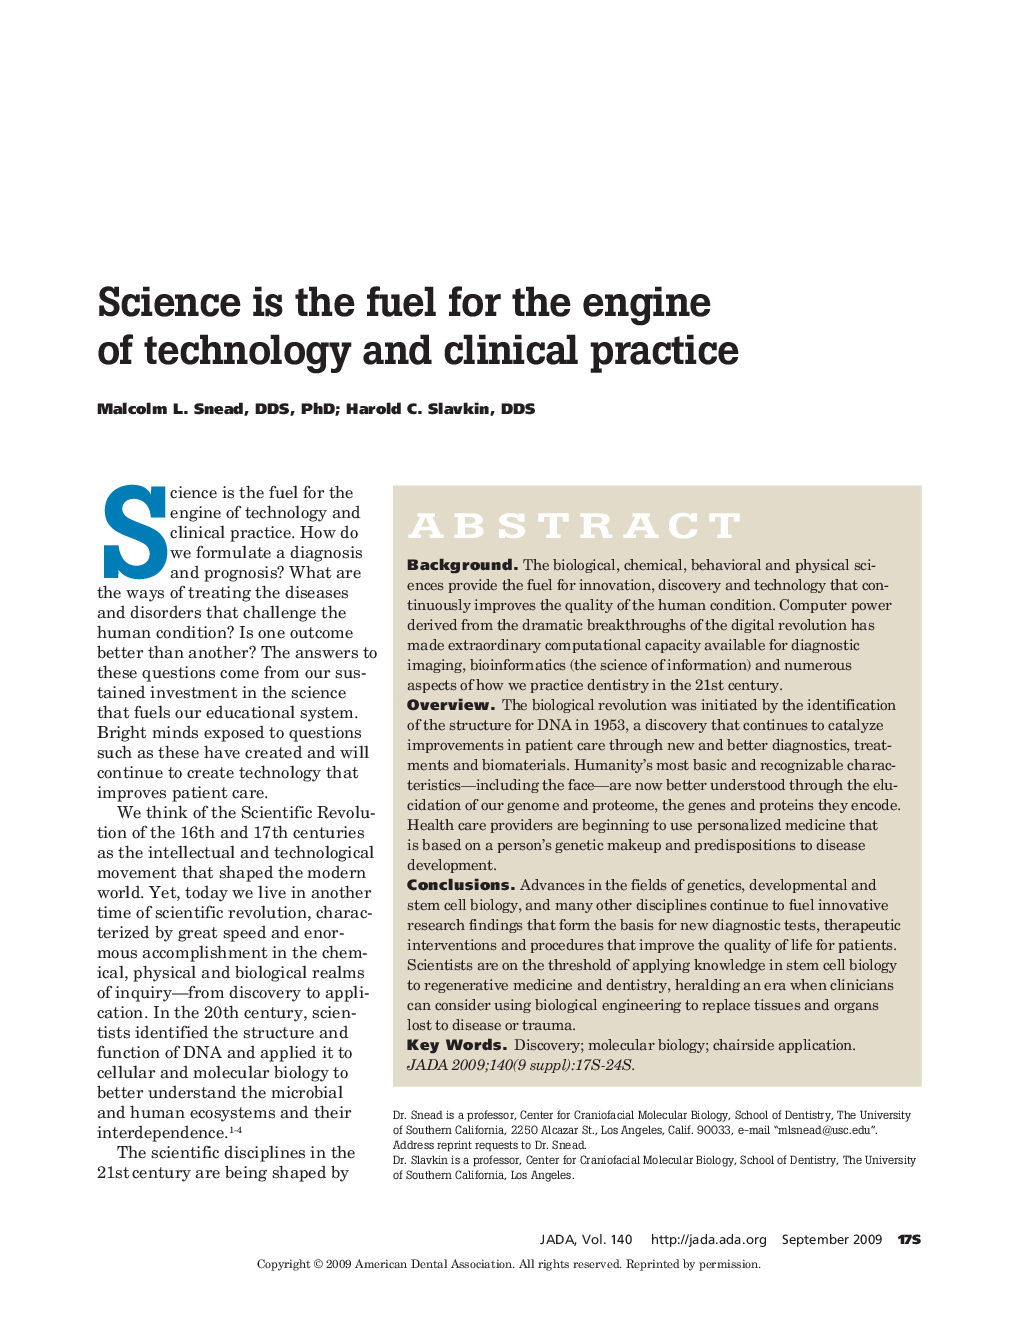 Science Is the Fuel for the Engine of Technology and Clinical Practice